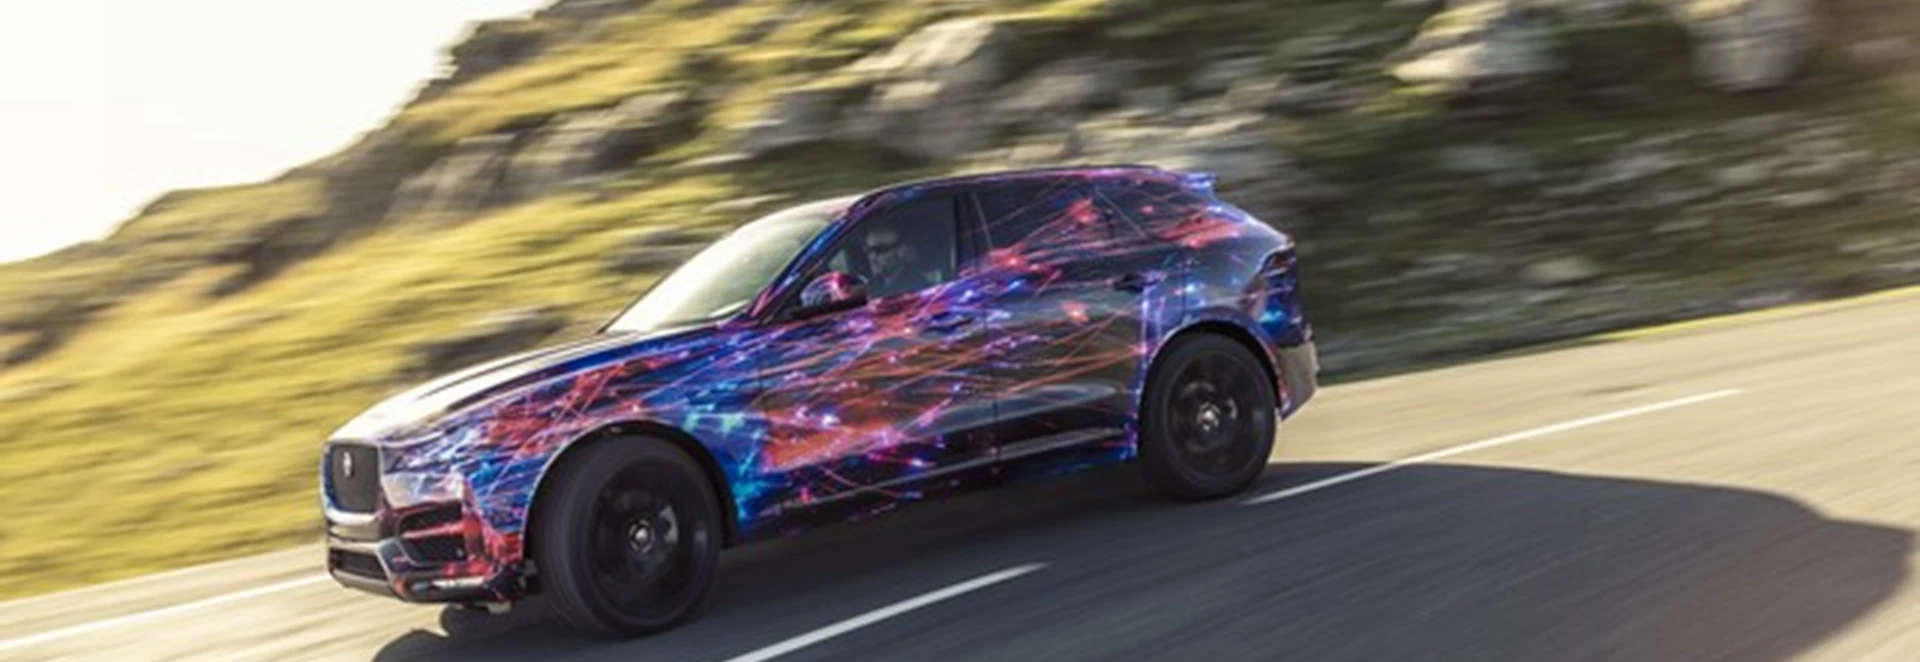 First look at the unmasked Jaguar F-PACE